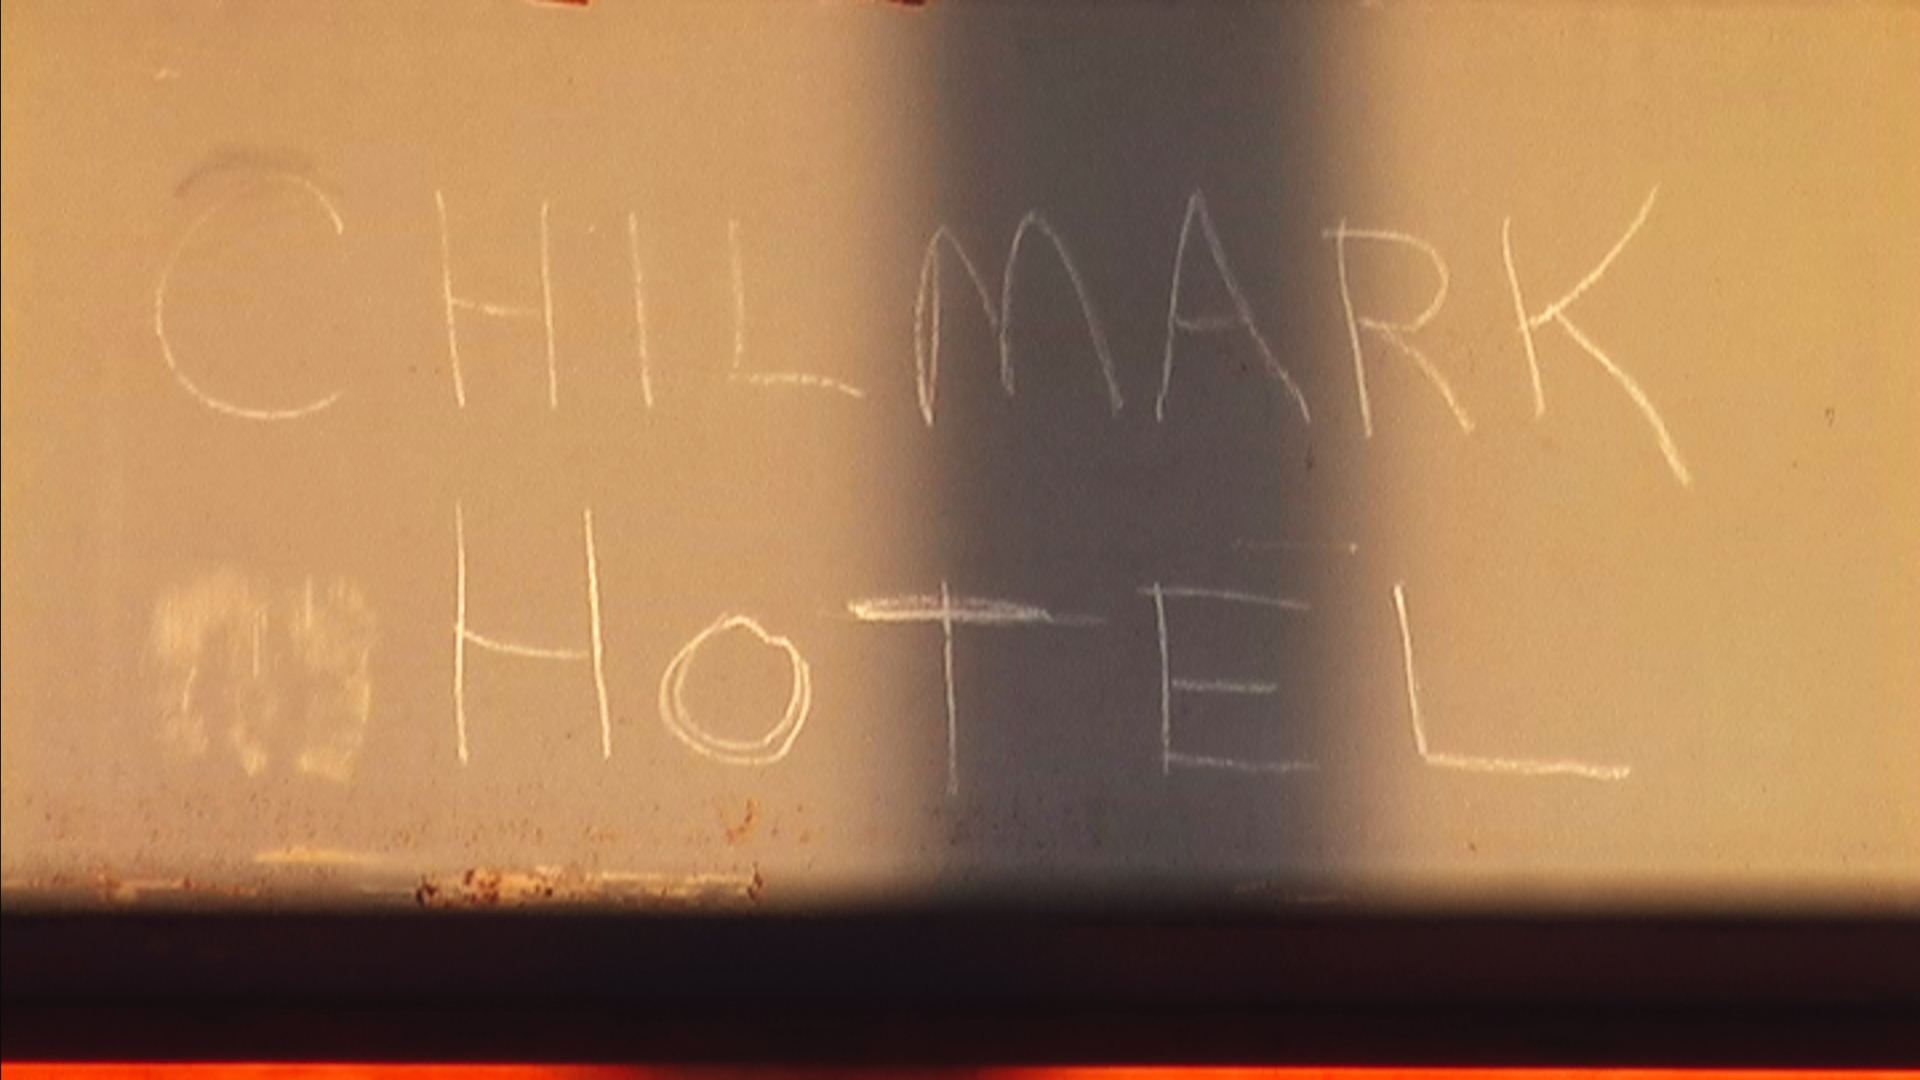 "Chilmark Hotel" was scrawled by workers on this steel beam in a controversial mansion under construction